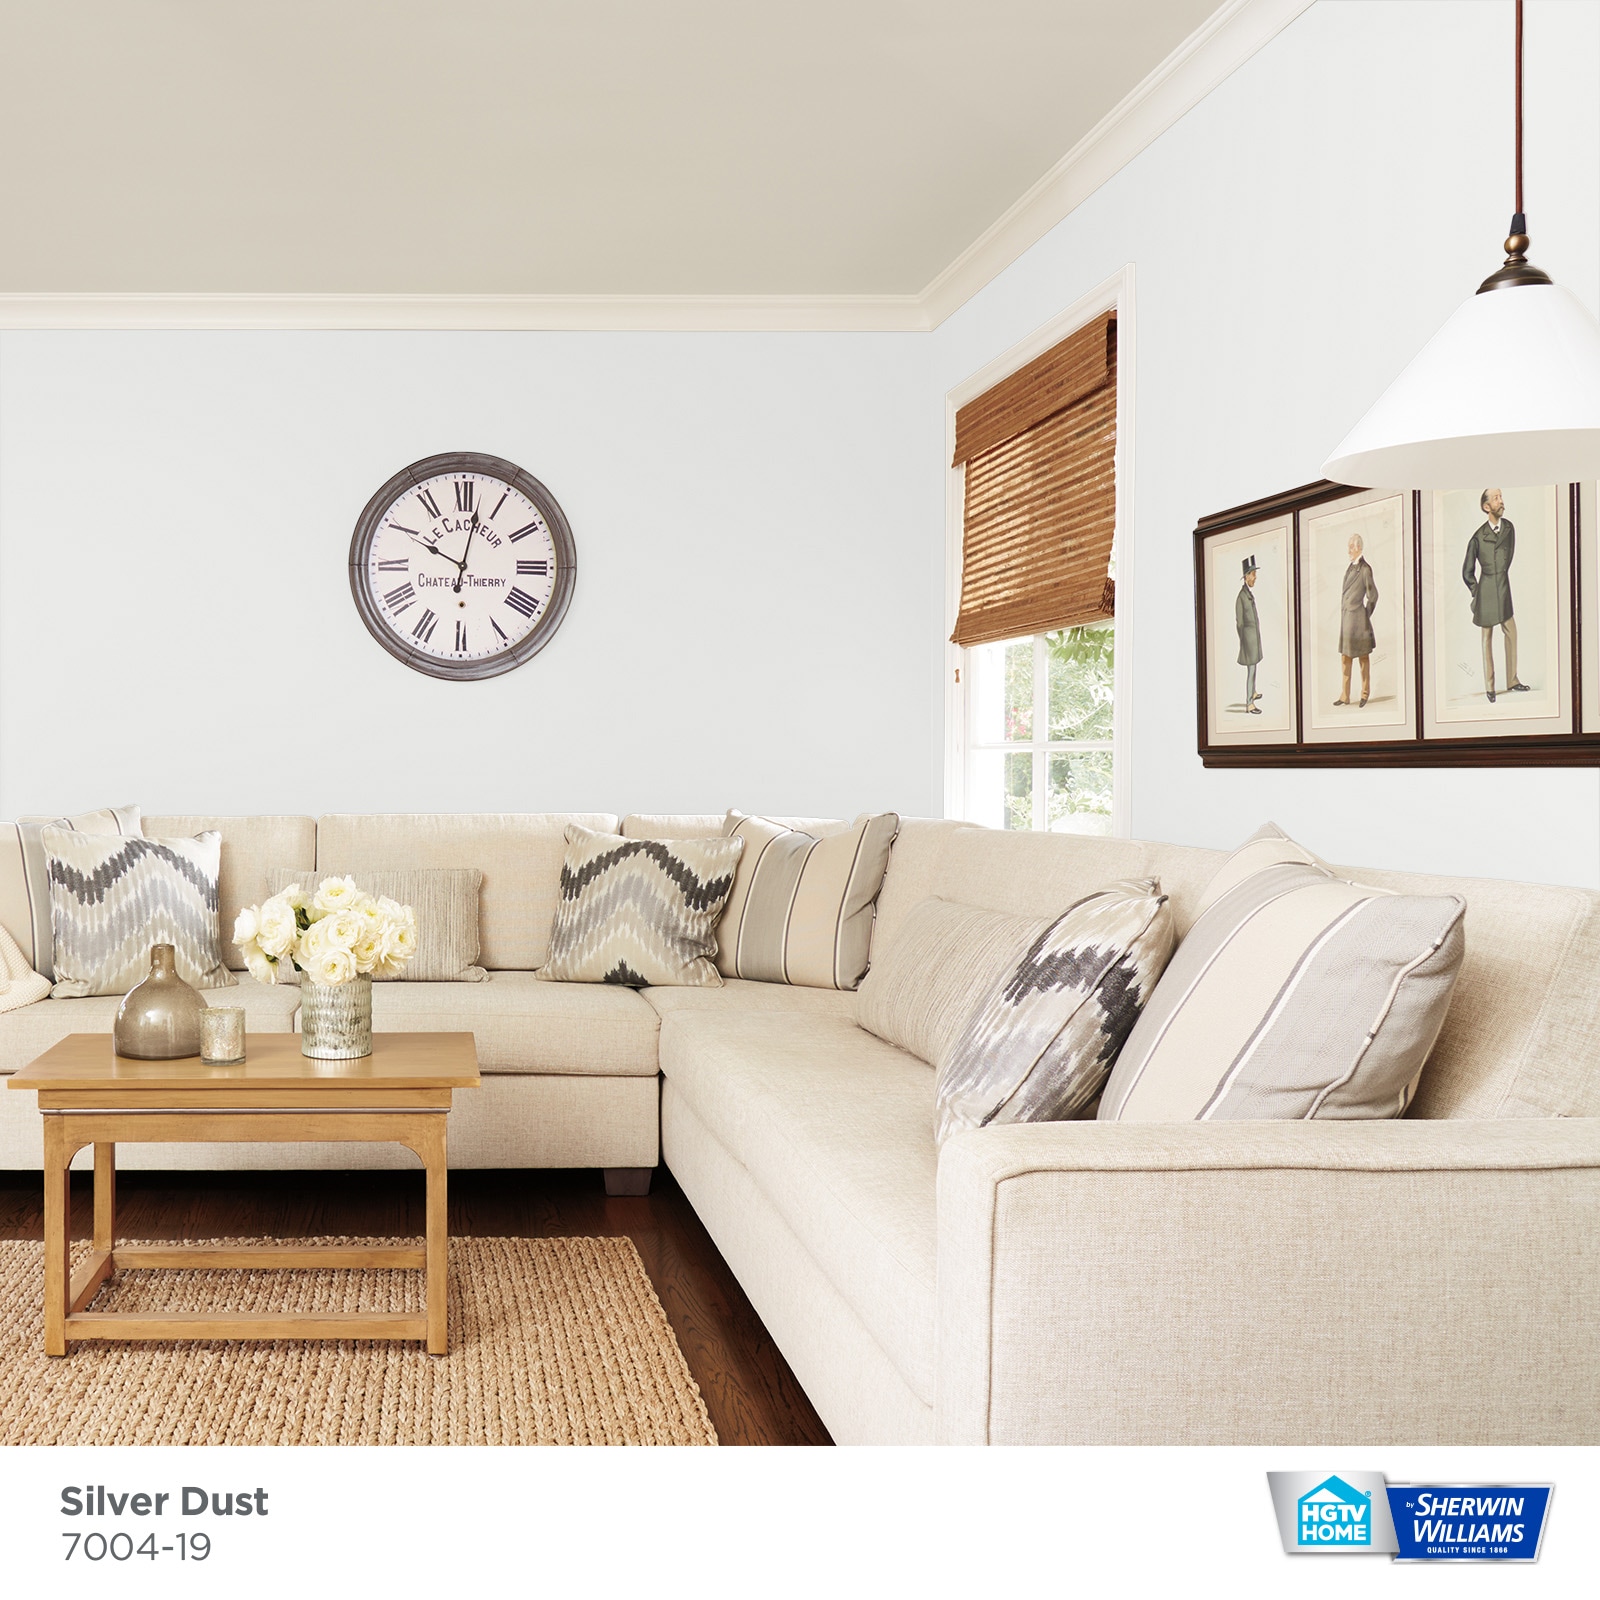 HGTV HOME by Sherwin-Williams Showcase Flat Silver Dust 7004-19